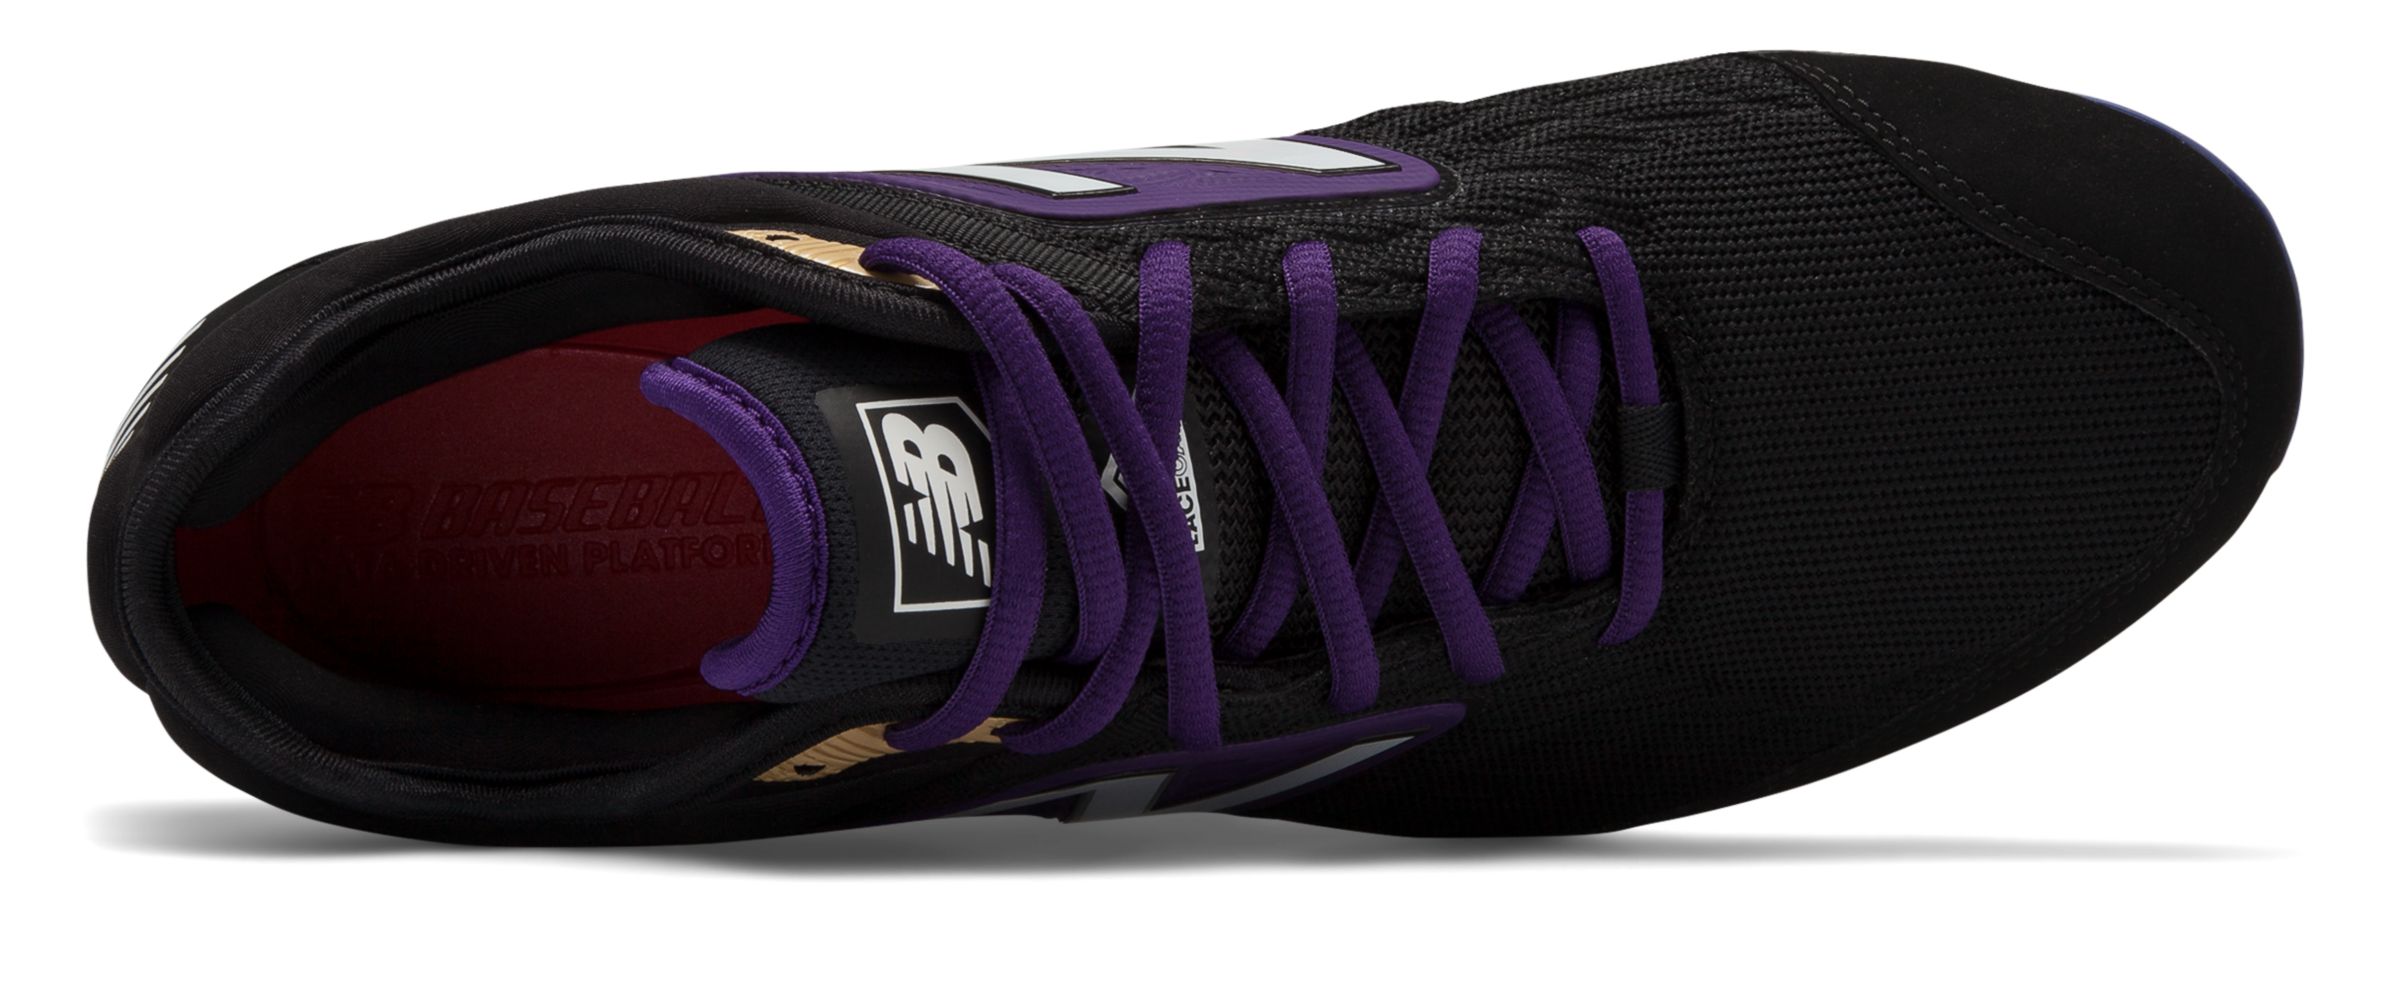 New Balance Low-Cut 3000v4 Metal Baseball Cleat Mens Shoes Black with Purple - image 3 of 4